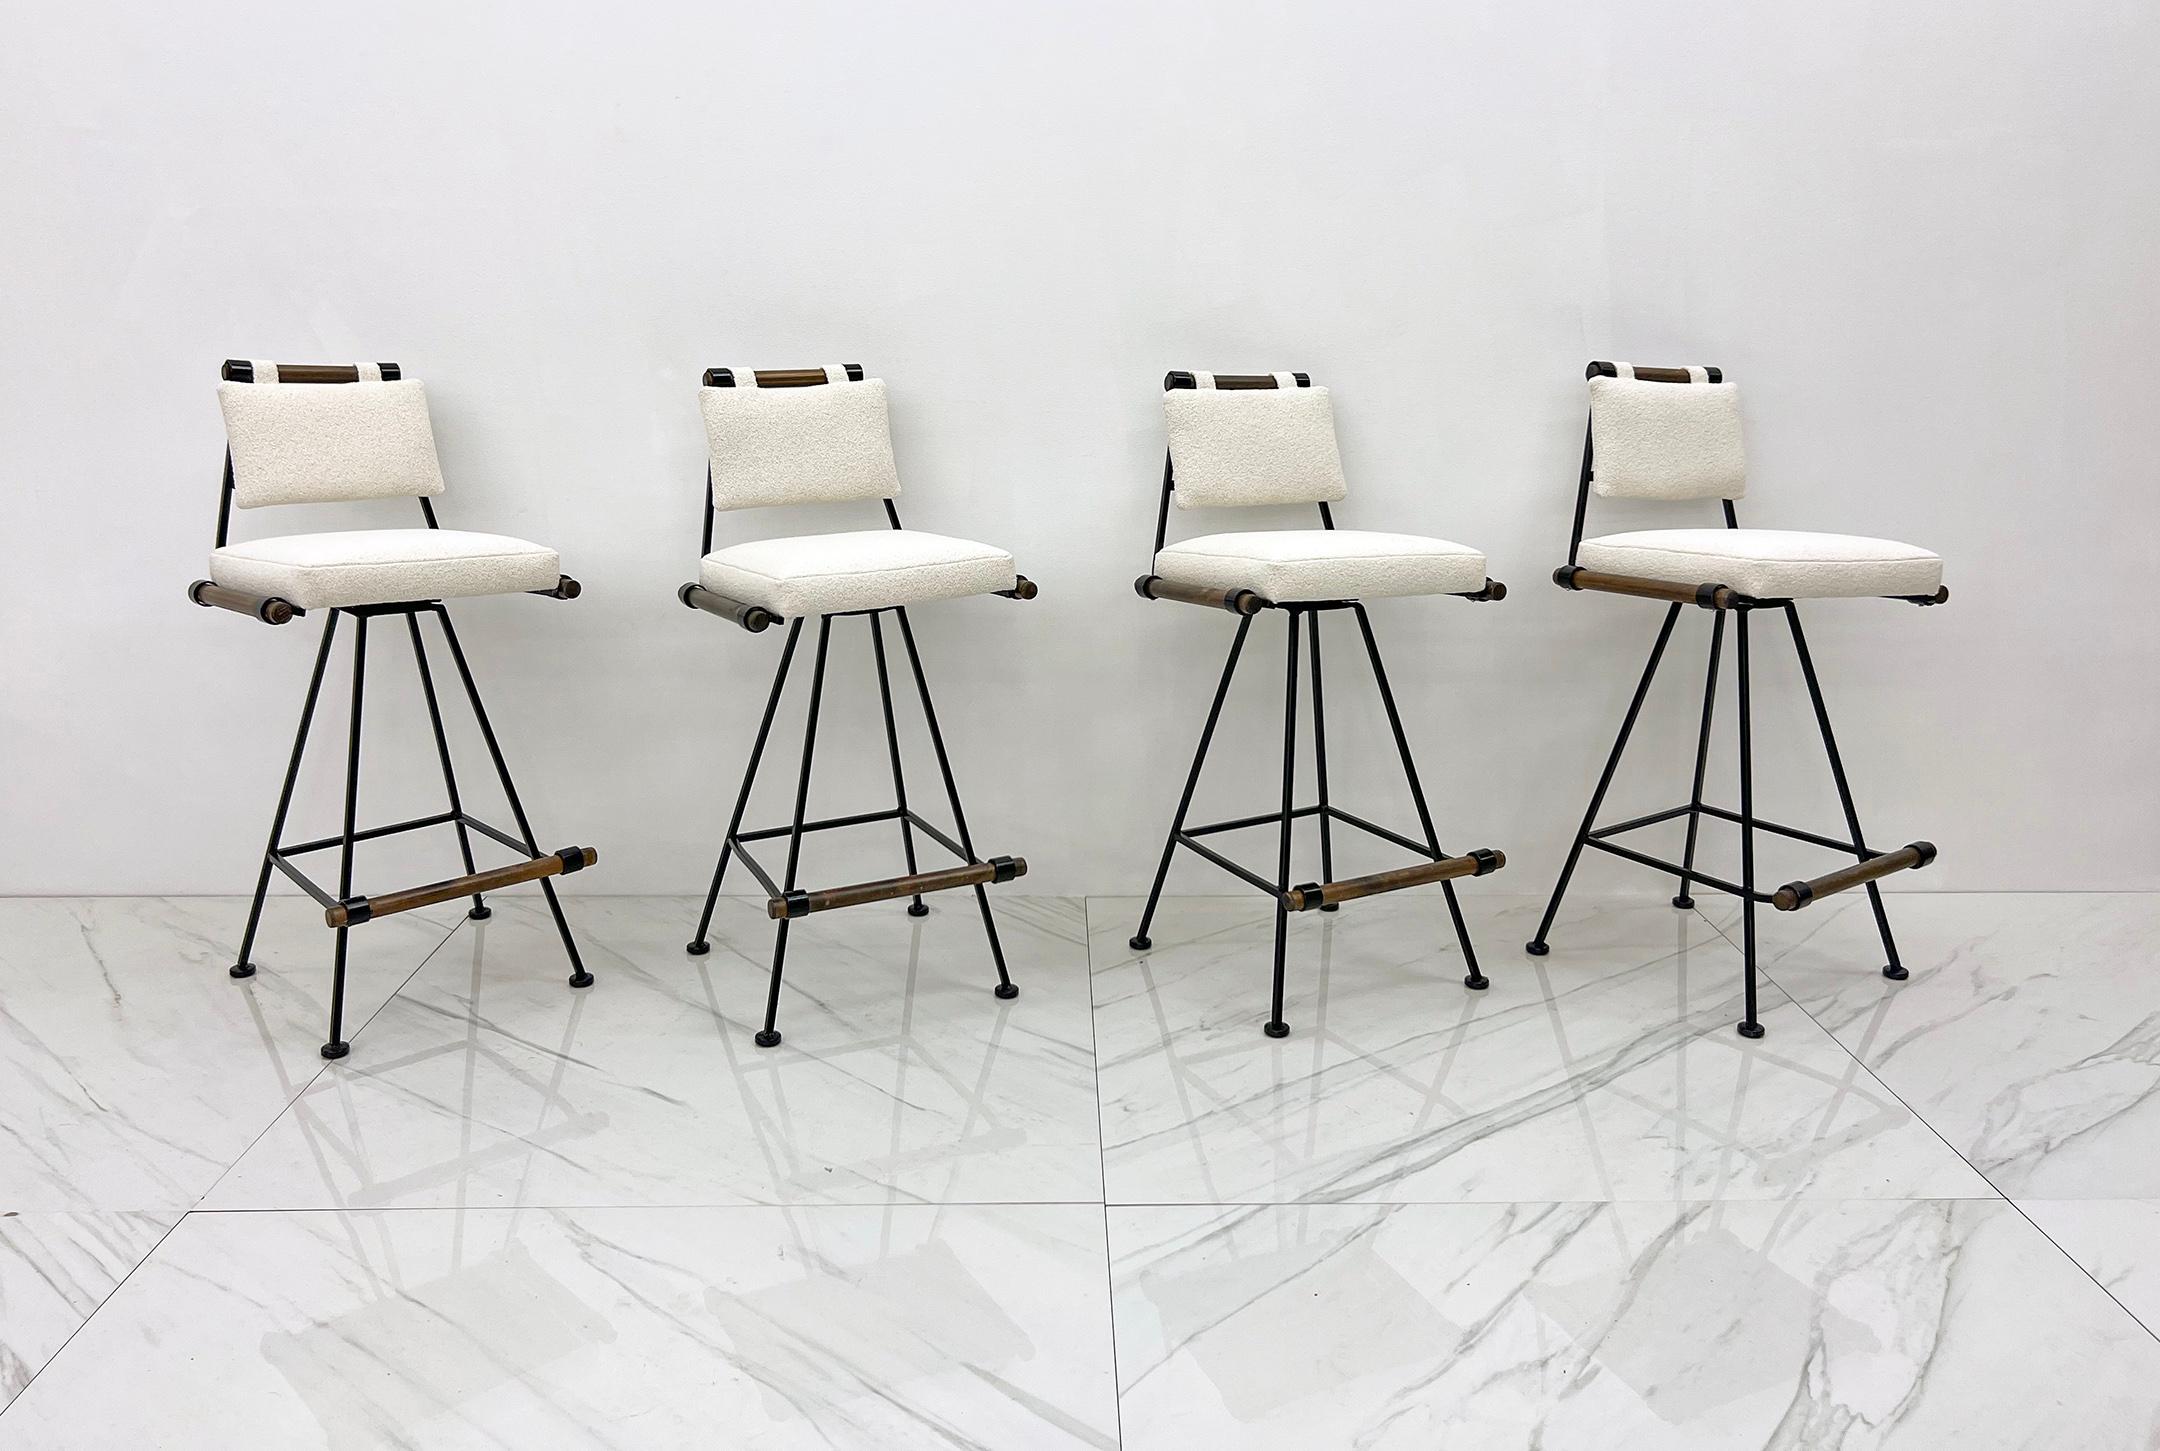 These mid-century bar stools are absolutely stunning. In the manner of Californian designer Cleo Baldon (often attributed to Cleo Baldon), there are several iterations of these stools and chairs that were designed for Terra and Inca. These stools